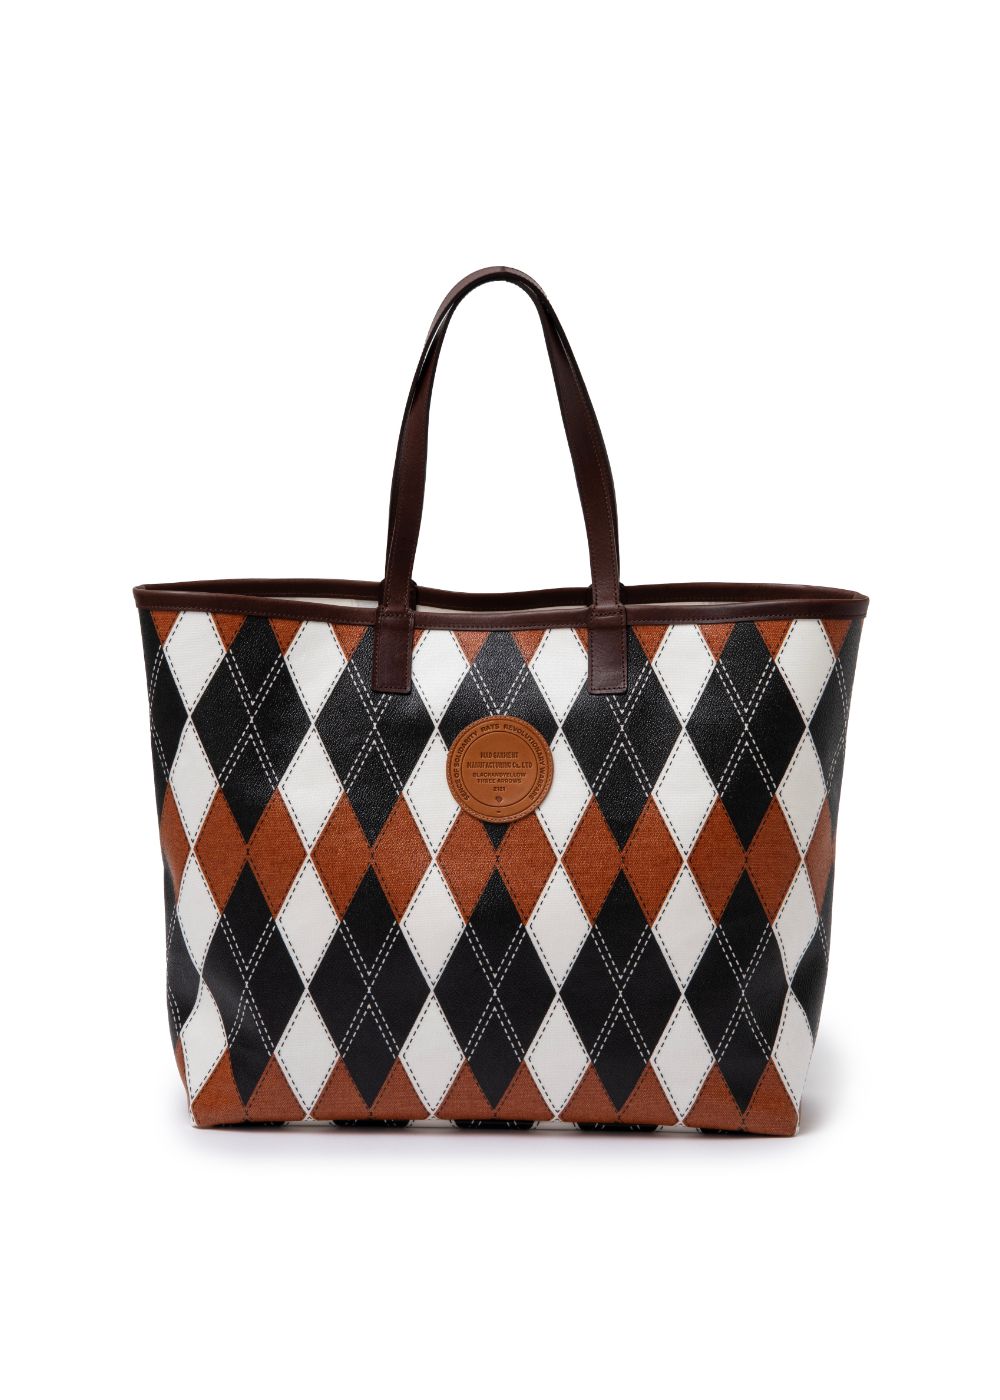 RATS - ARGYLE TOTE BAG (BROWN) / アーガイル トートバッグ | LOOPHOLE